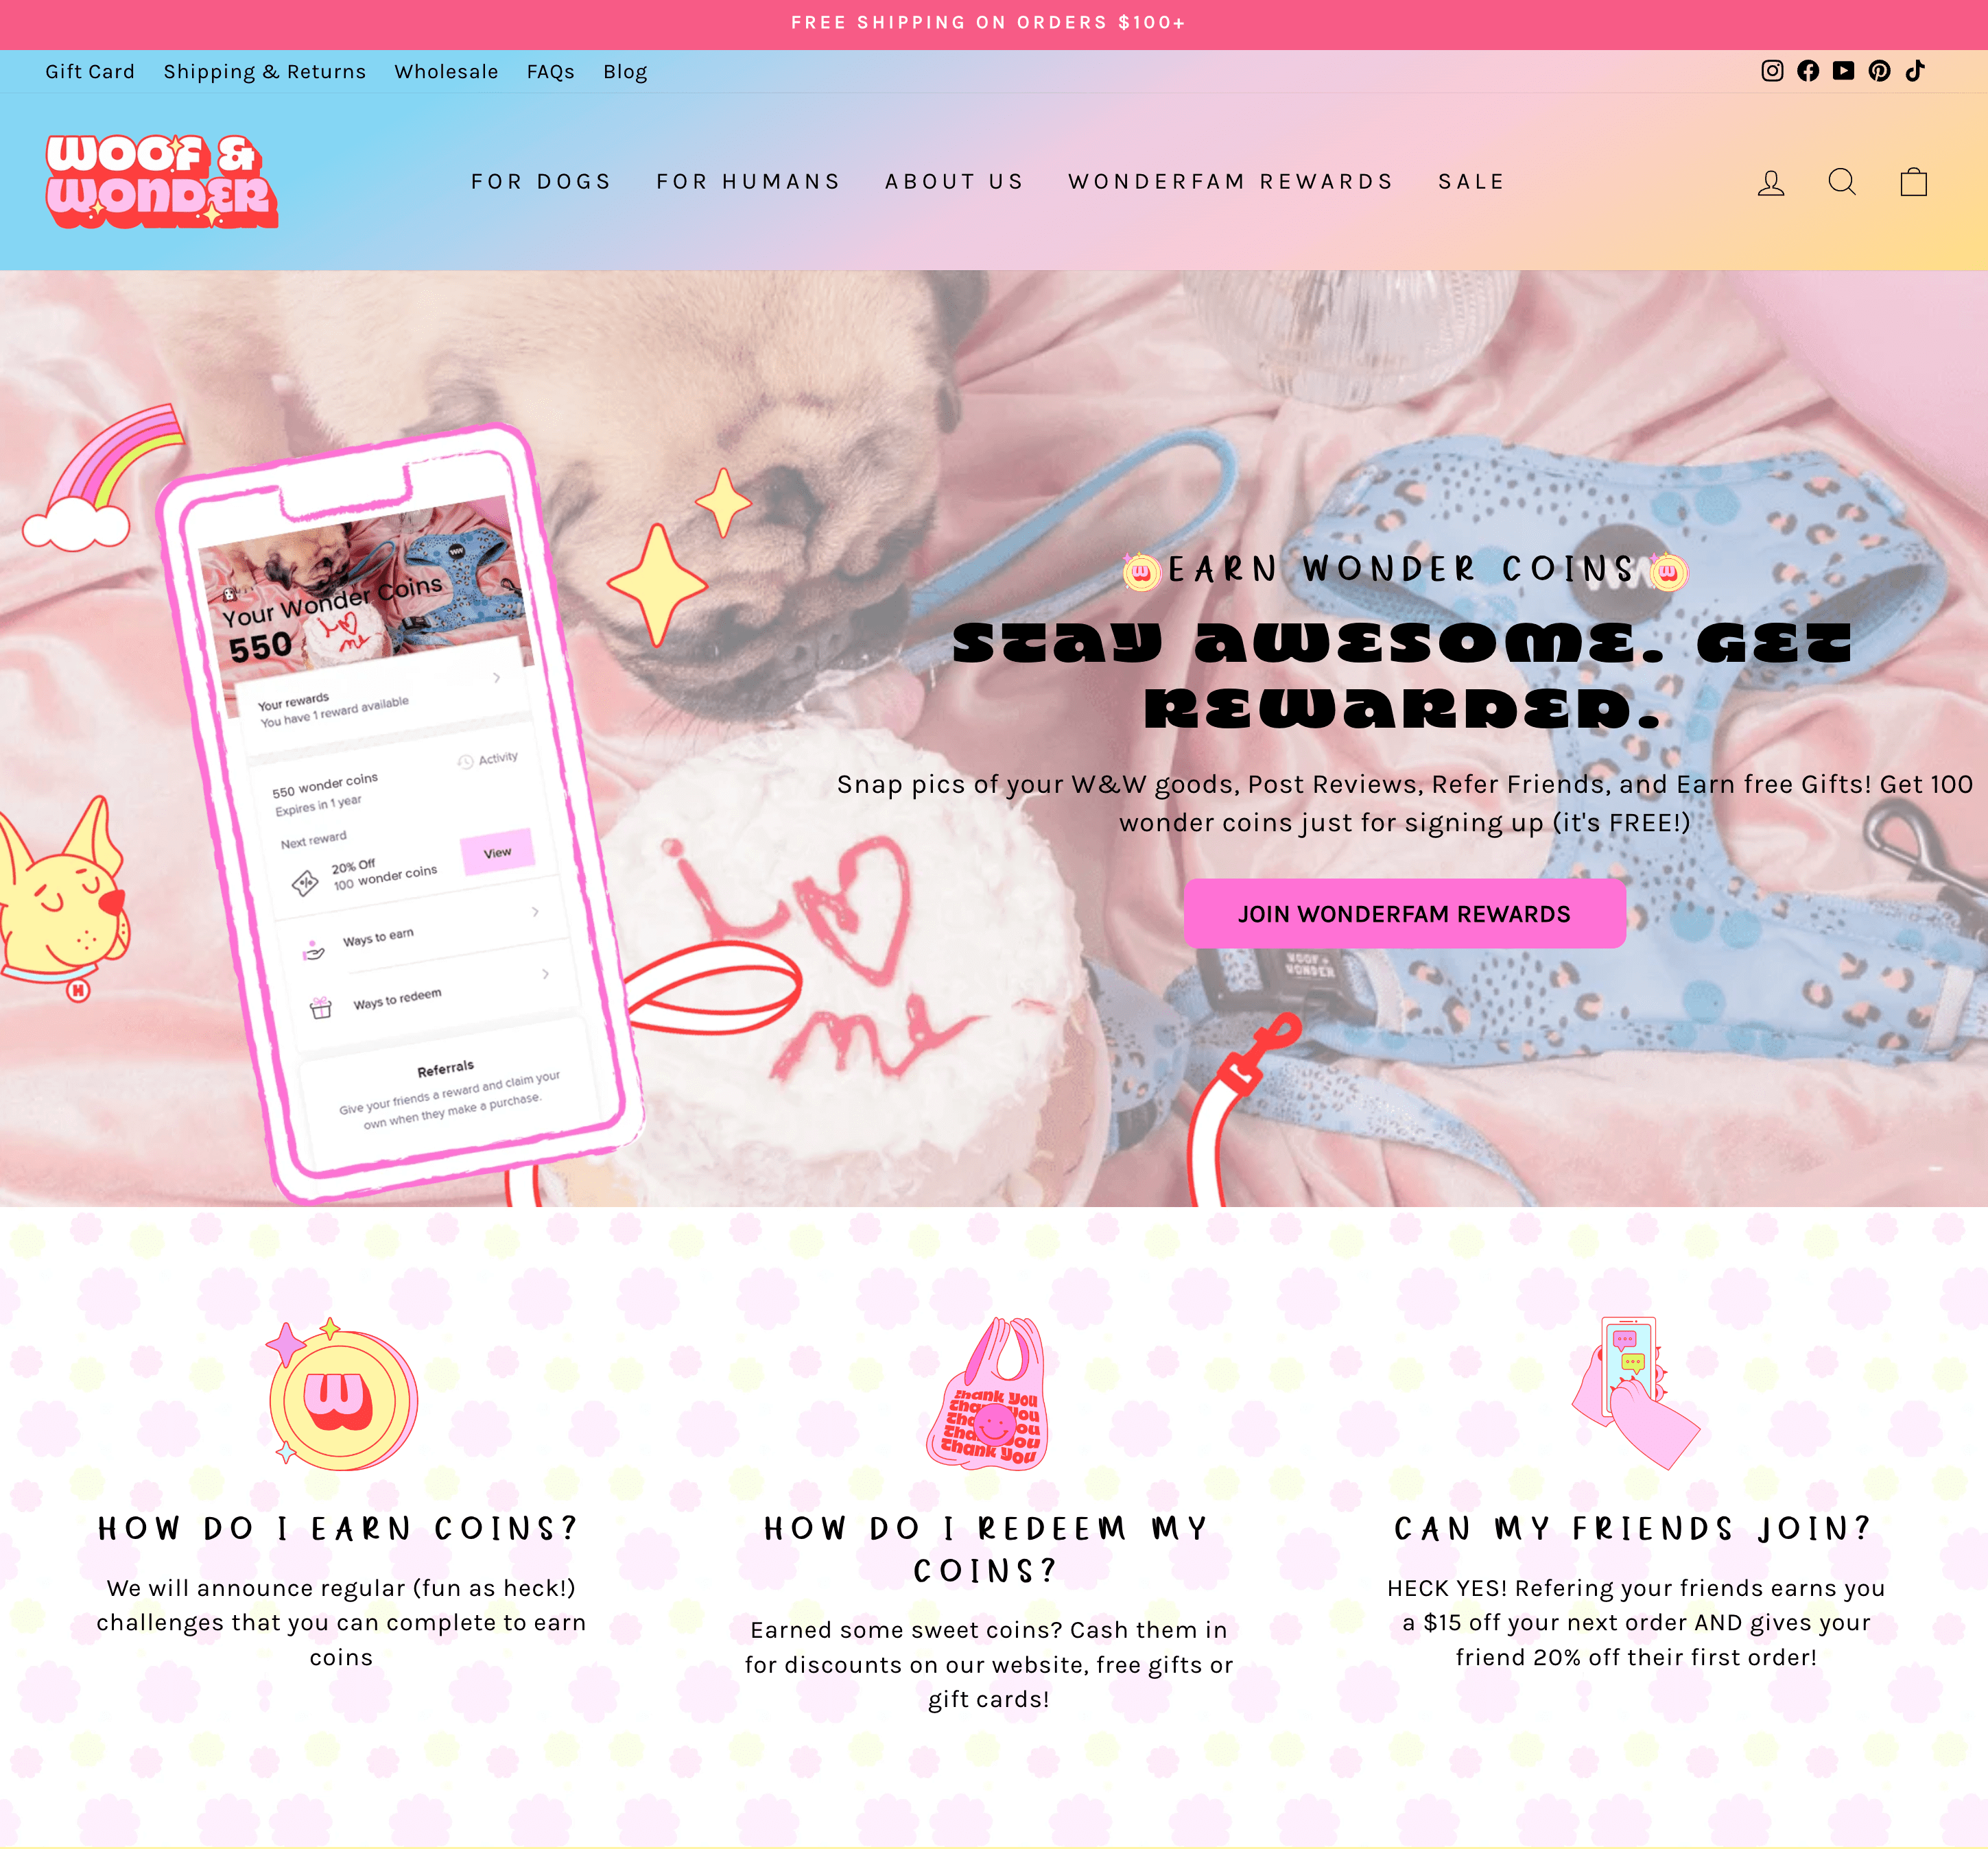 A screenshot of Woof and Wonder’s Wonderfam Rewards program explainer page. It shows a screenshot of the rewards program panel and explains how to earn coins, redeem them, and invite friends to join the program through referrals with branded icons and colors. 